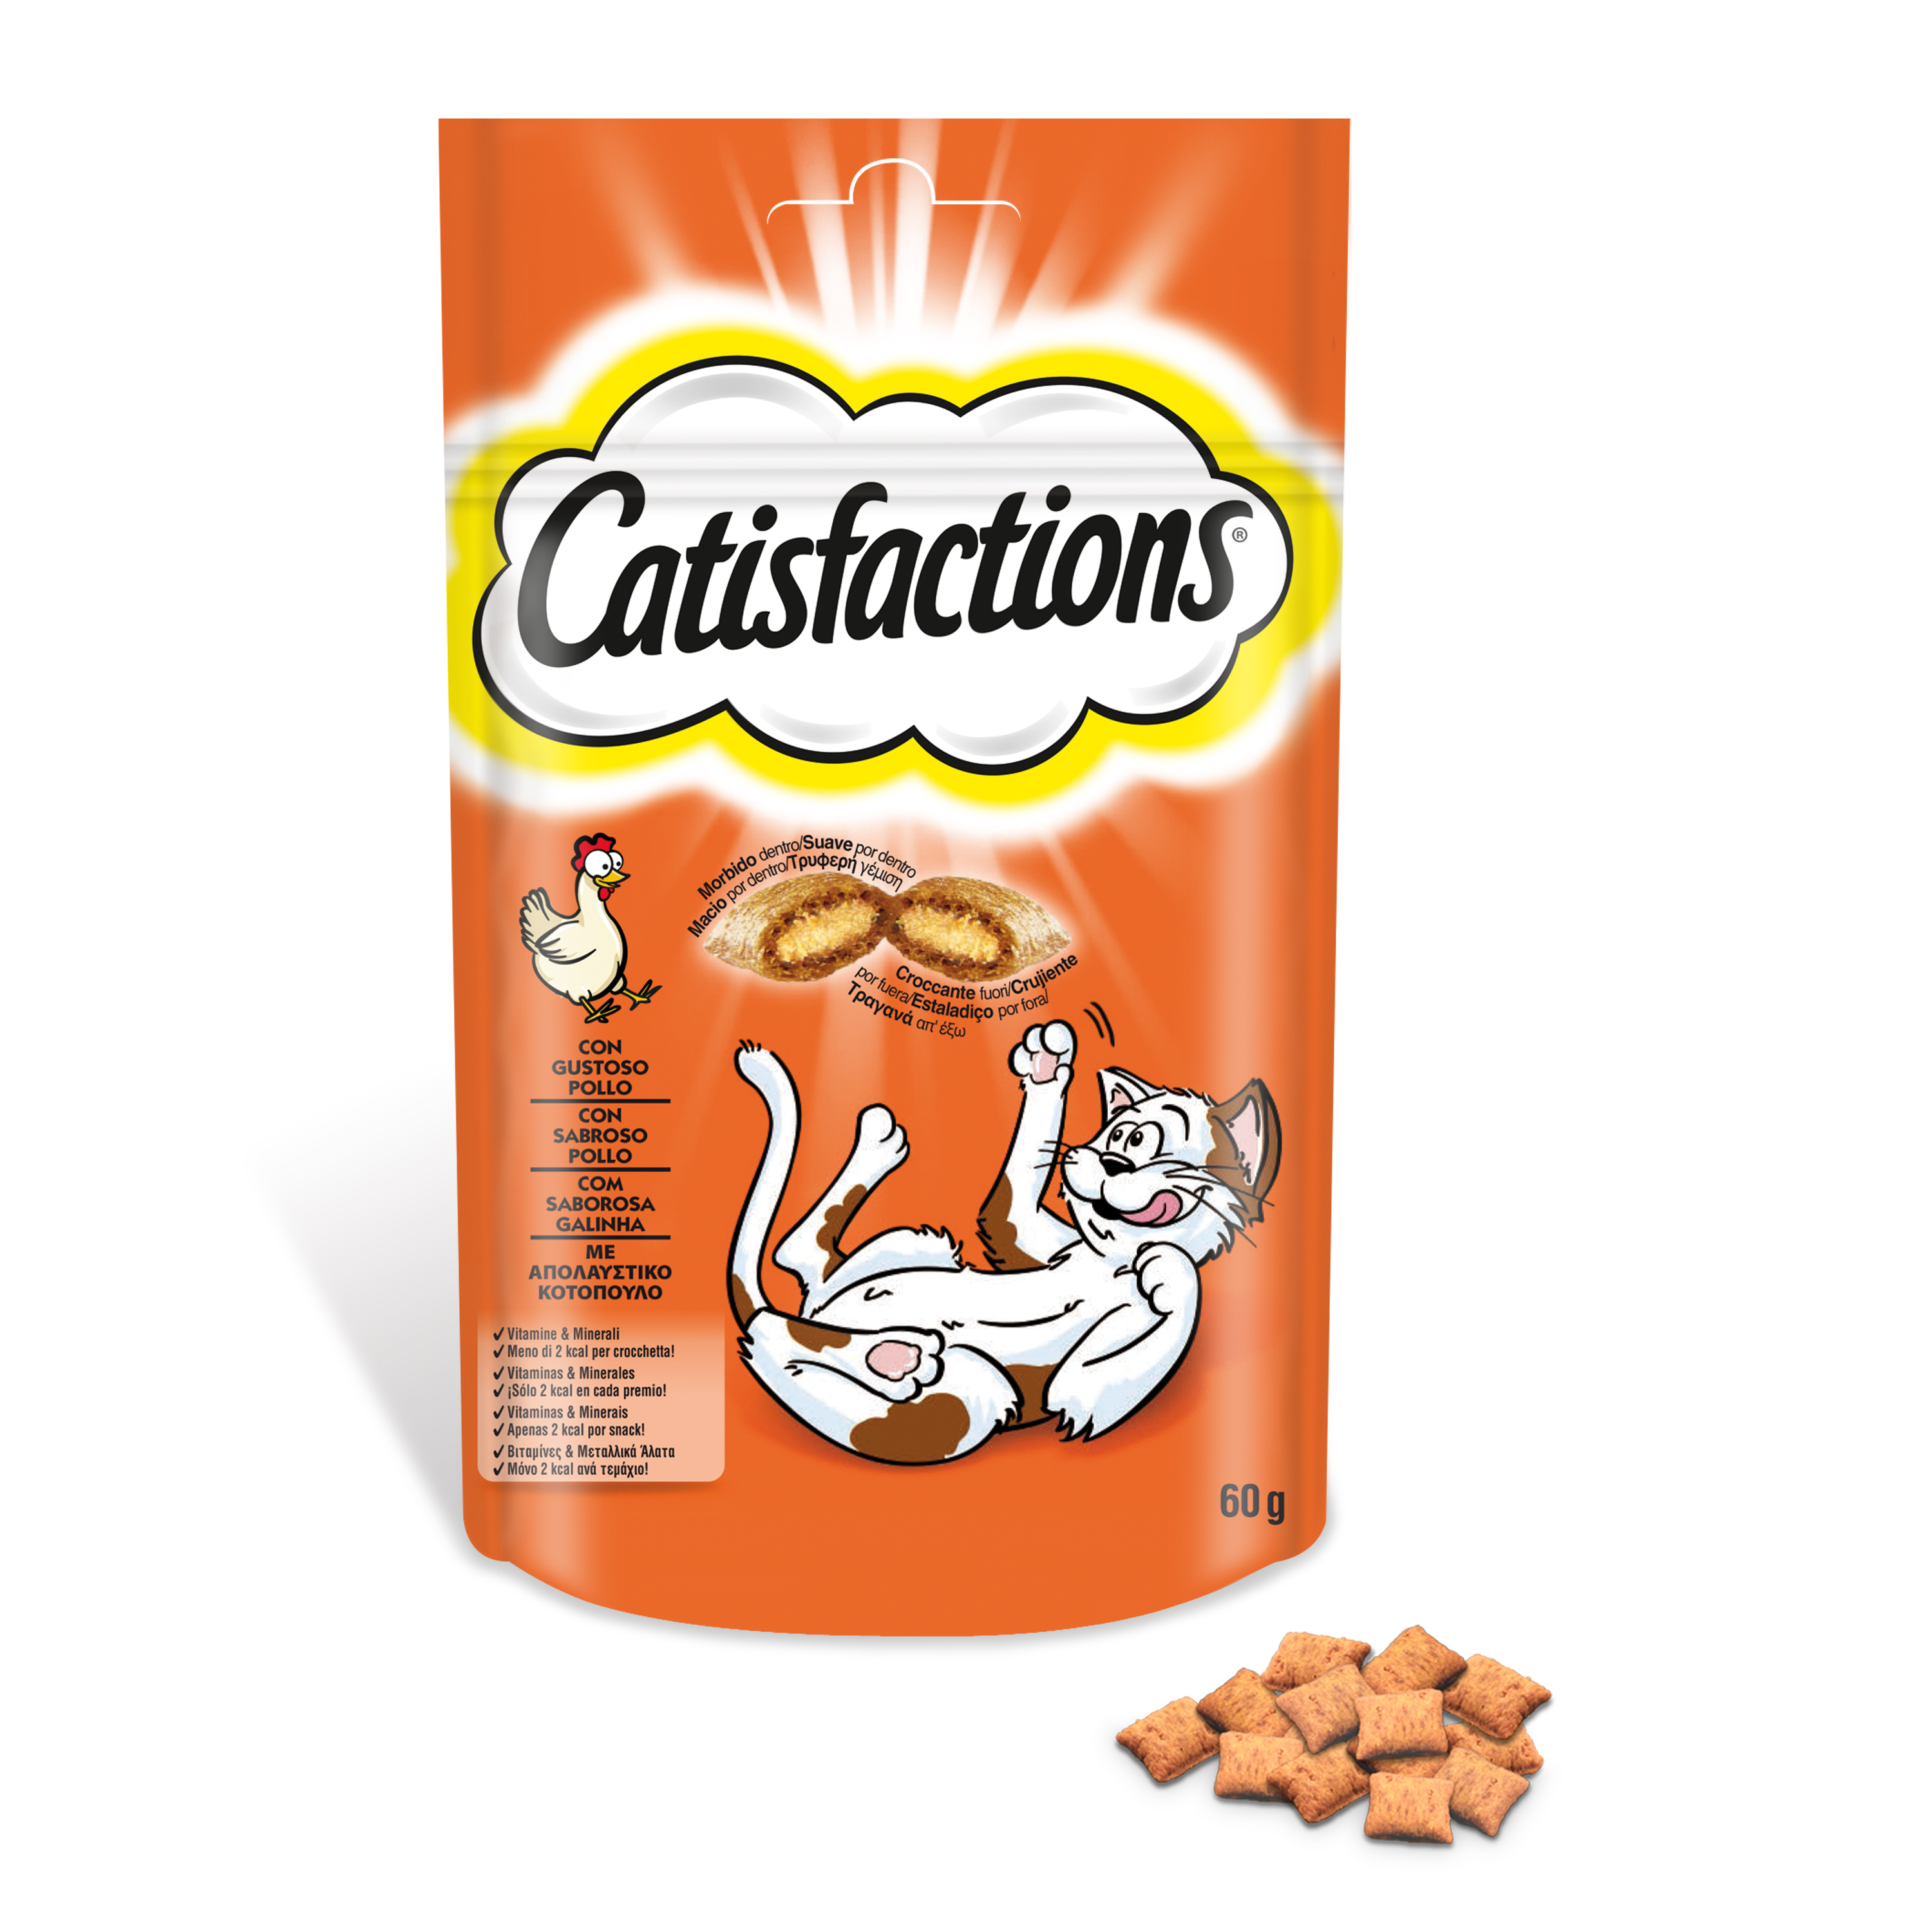 Catisfactions youzz Portugal